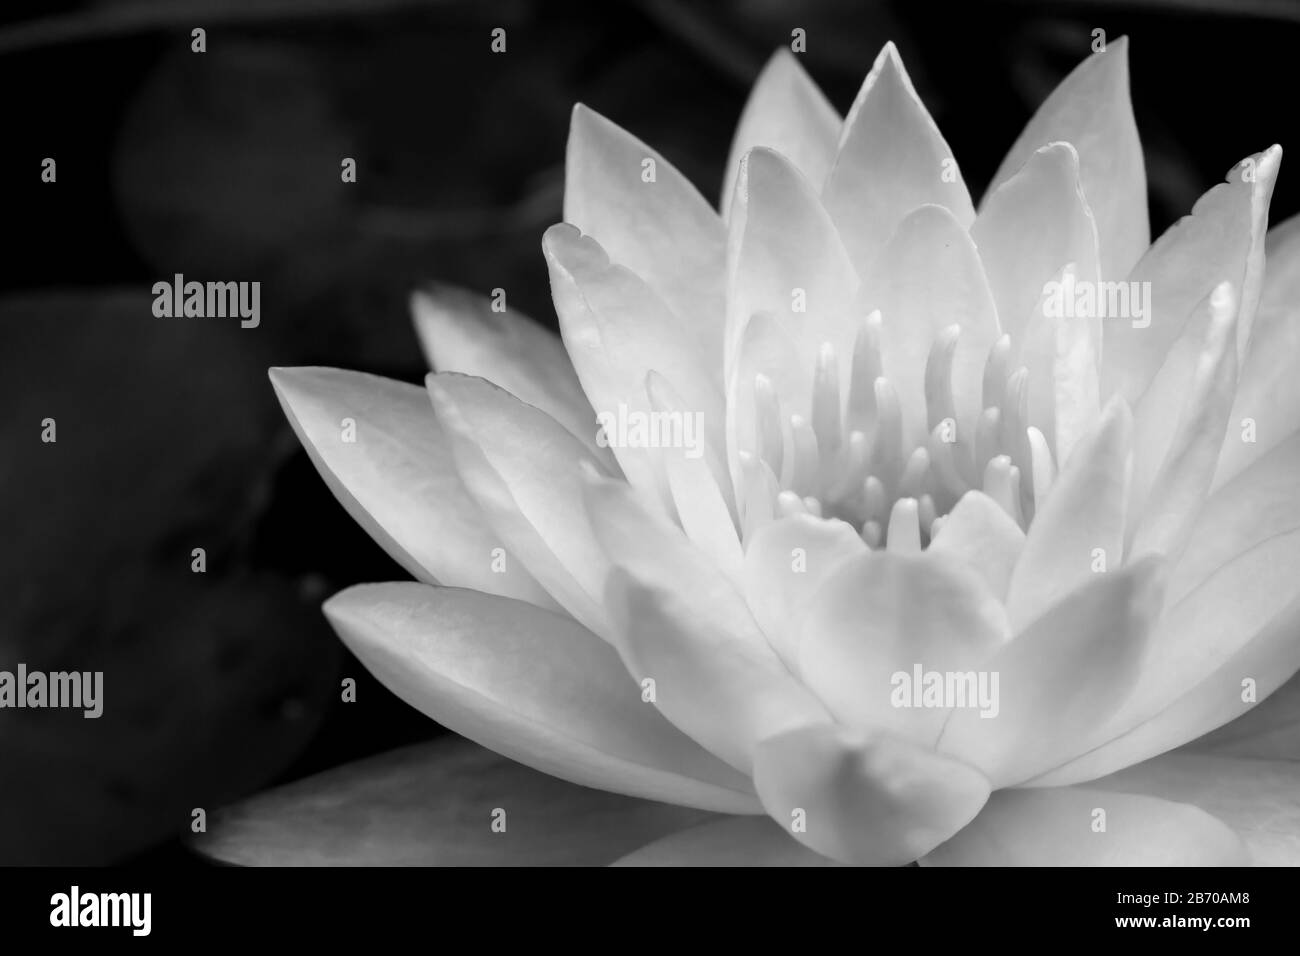 Close-up of a waterlily (Nymphaea) flower, in monochrome, with a dark background Stock Photo